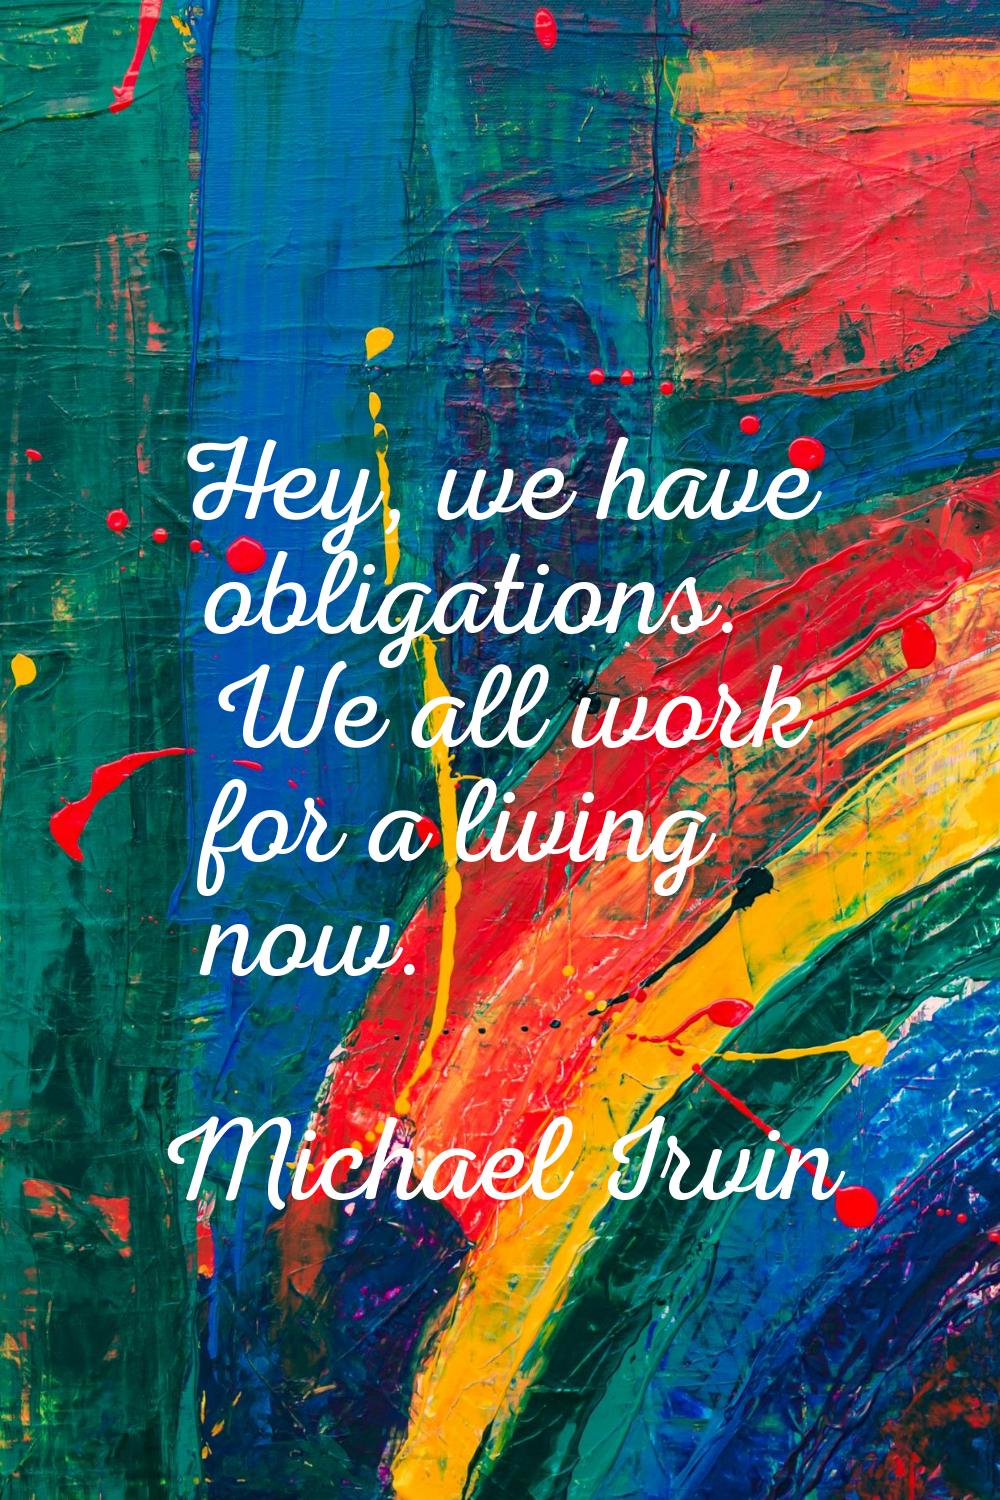 Hey, we have obligations. We all work for a living now.